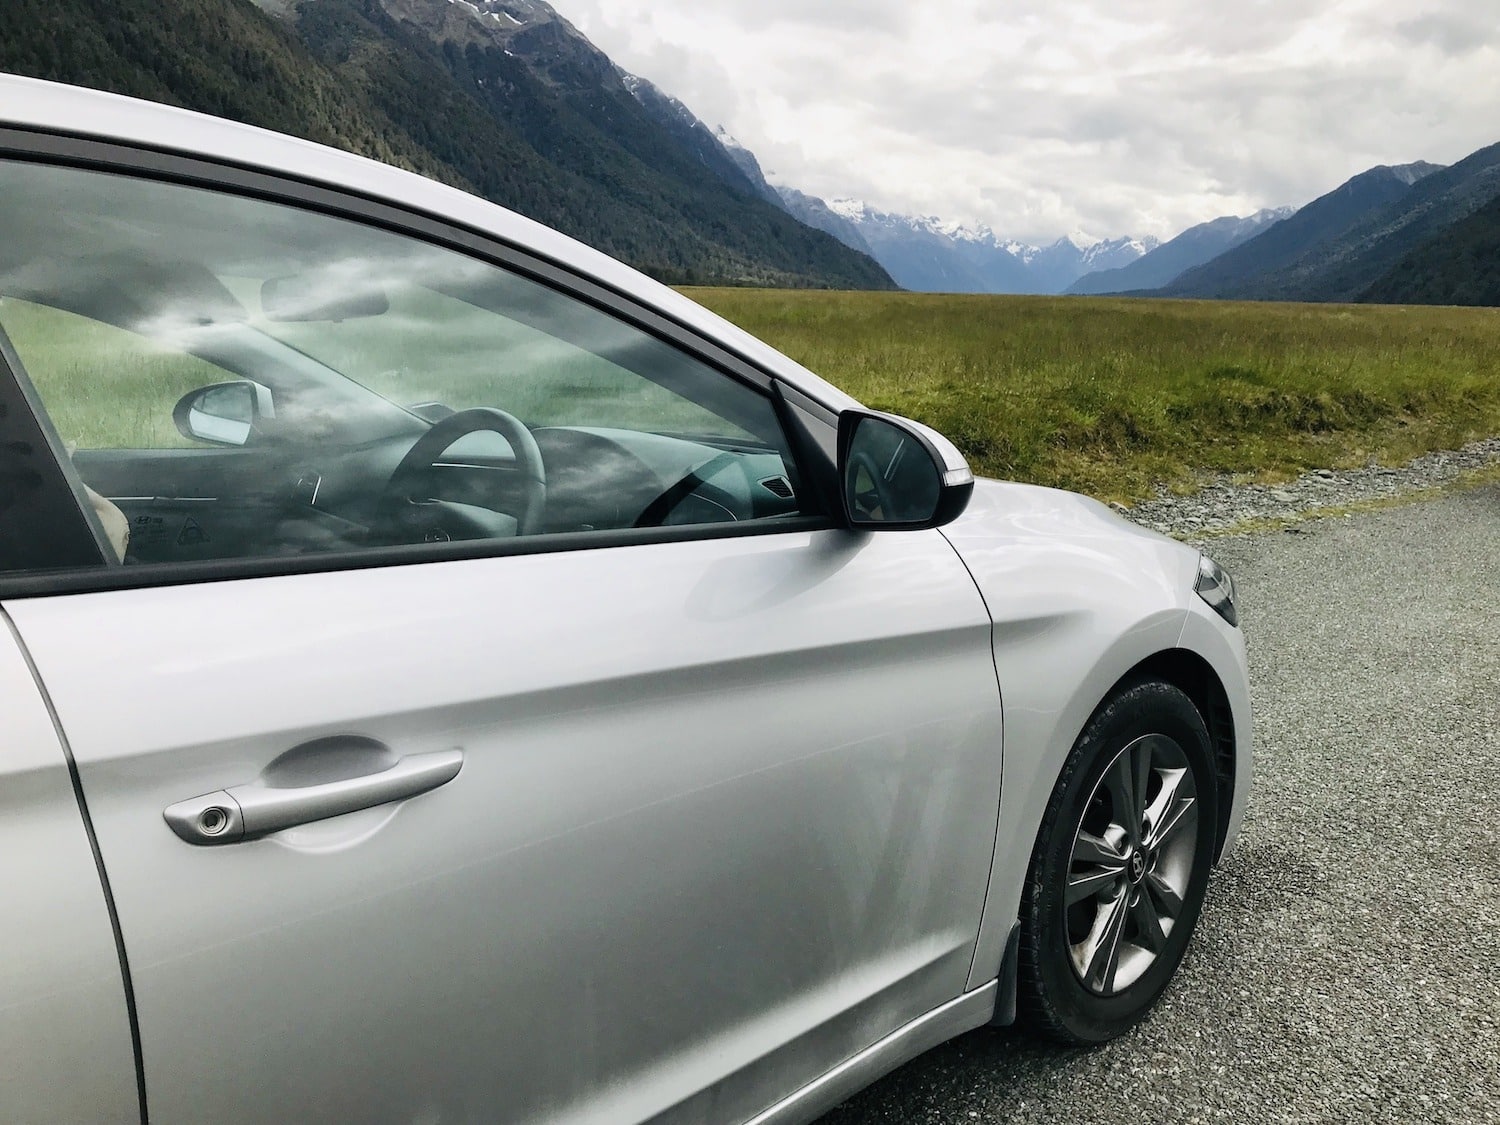 What To Expect On The Magnificent Queenstown To Milford Sound Drive!